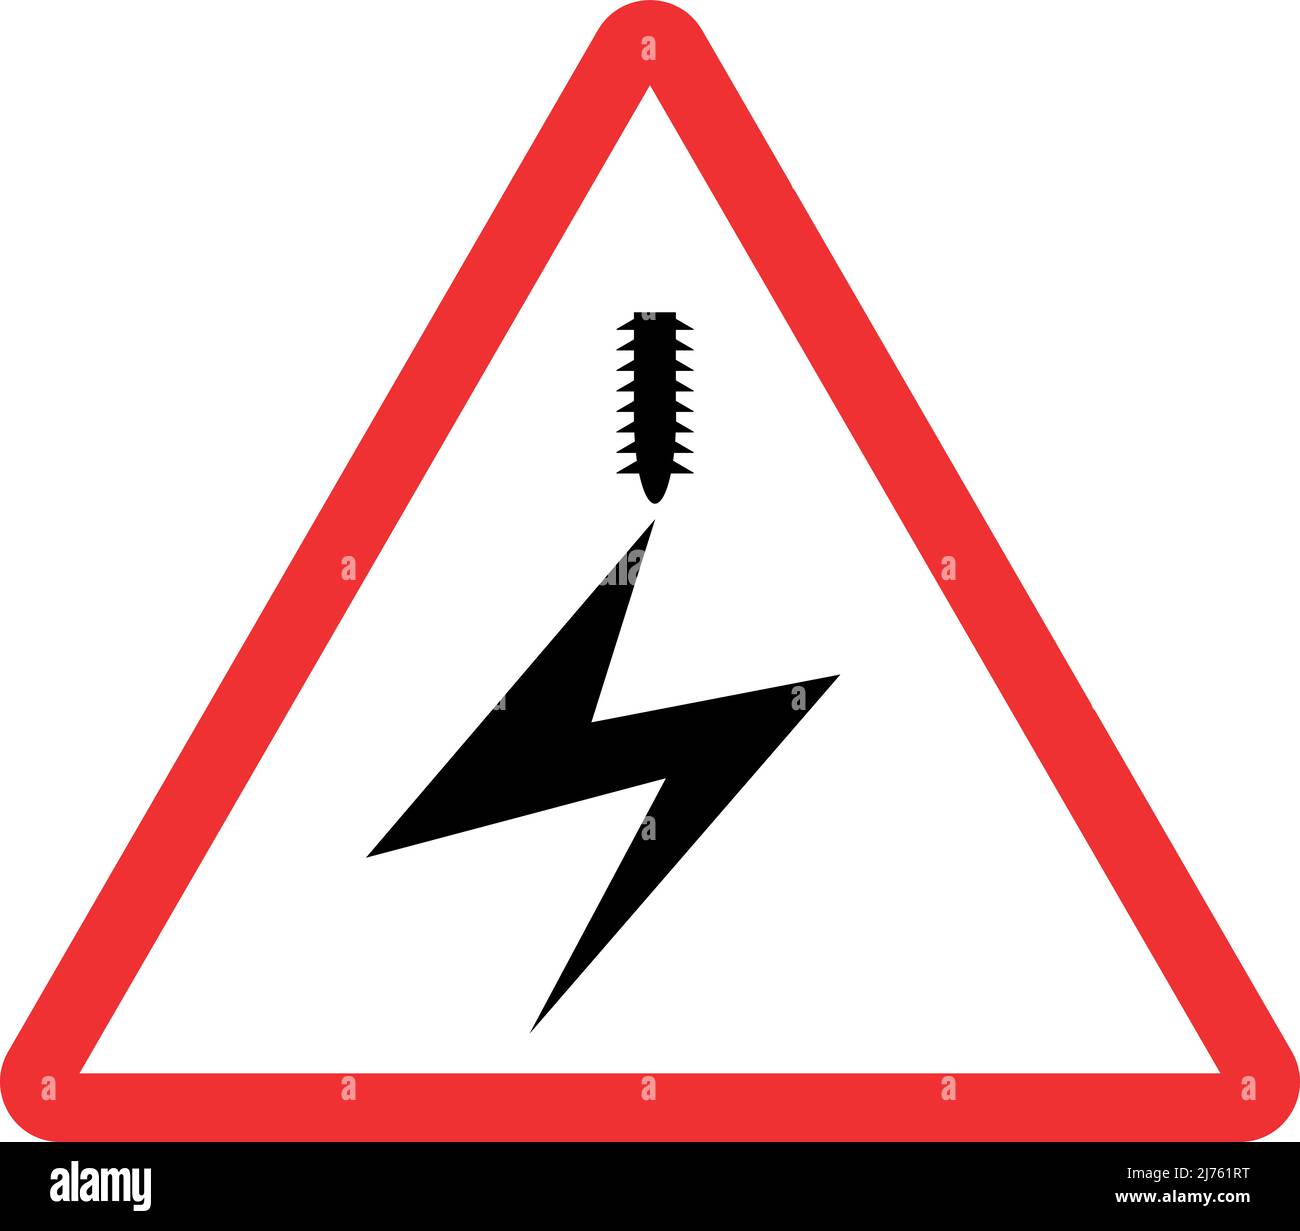 Electrified overhead cable warning sign. Red triangle background. Electrical safety signs and symbols. Stock Vector